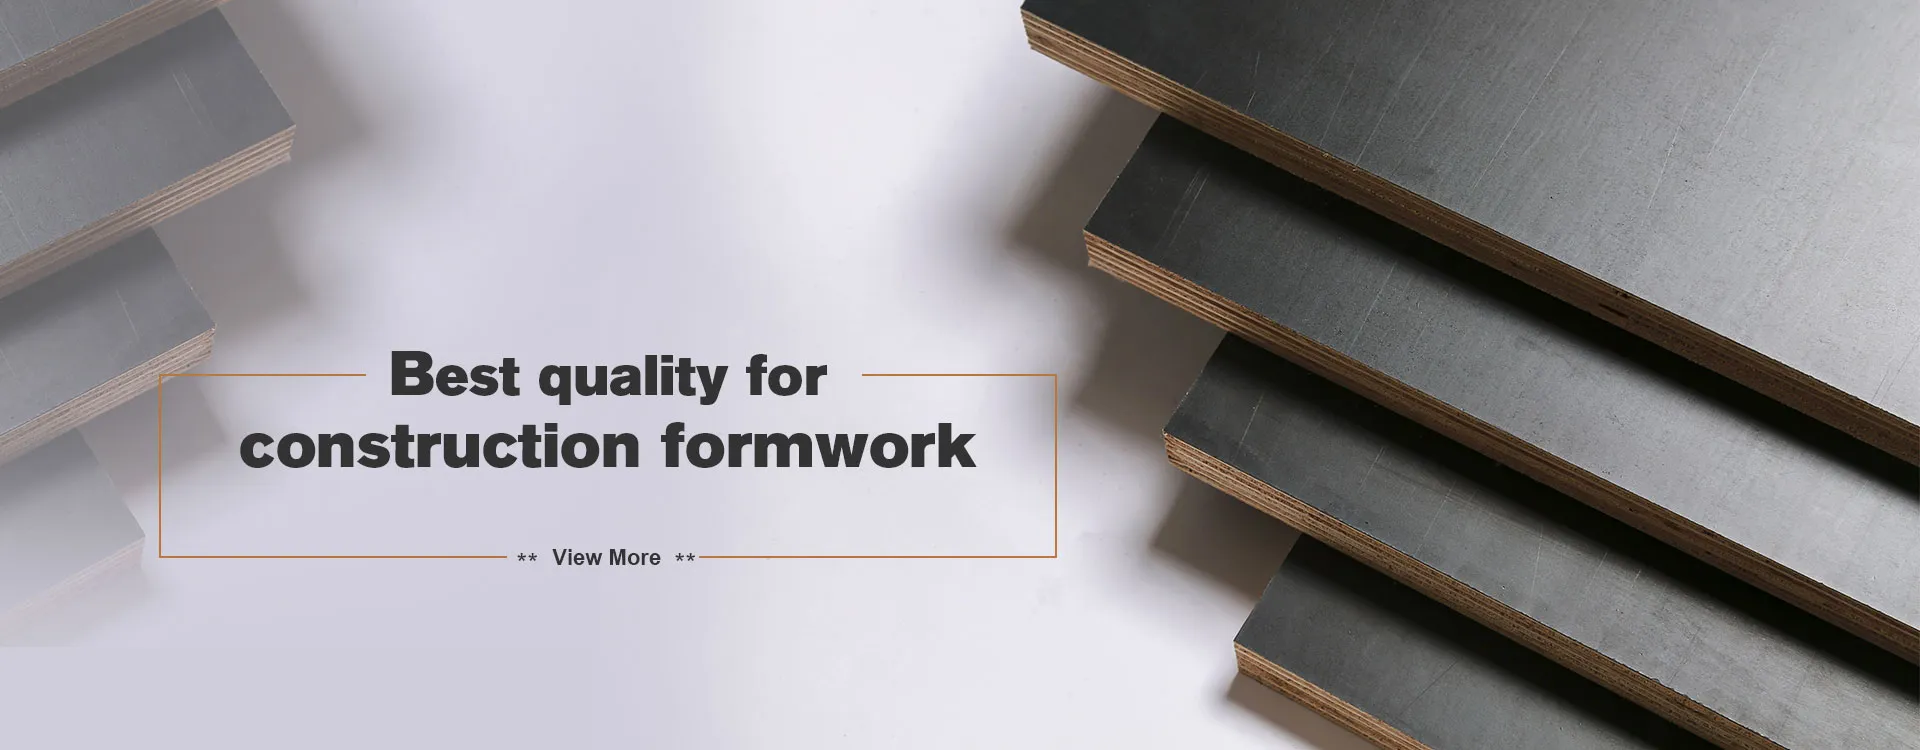 Best quality for construction formwork